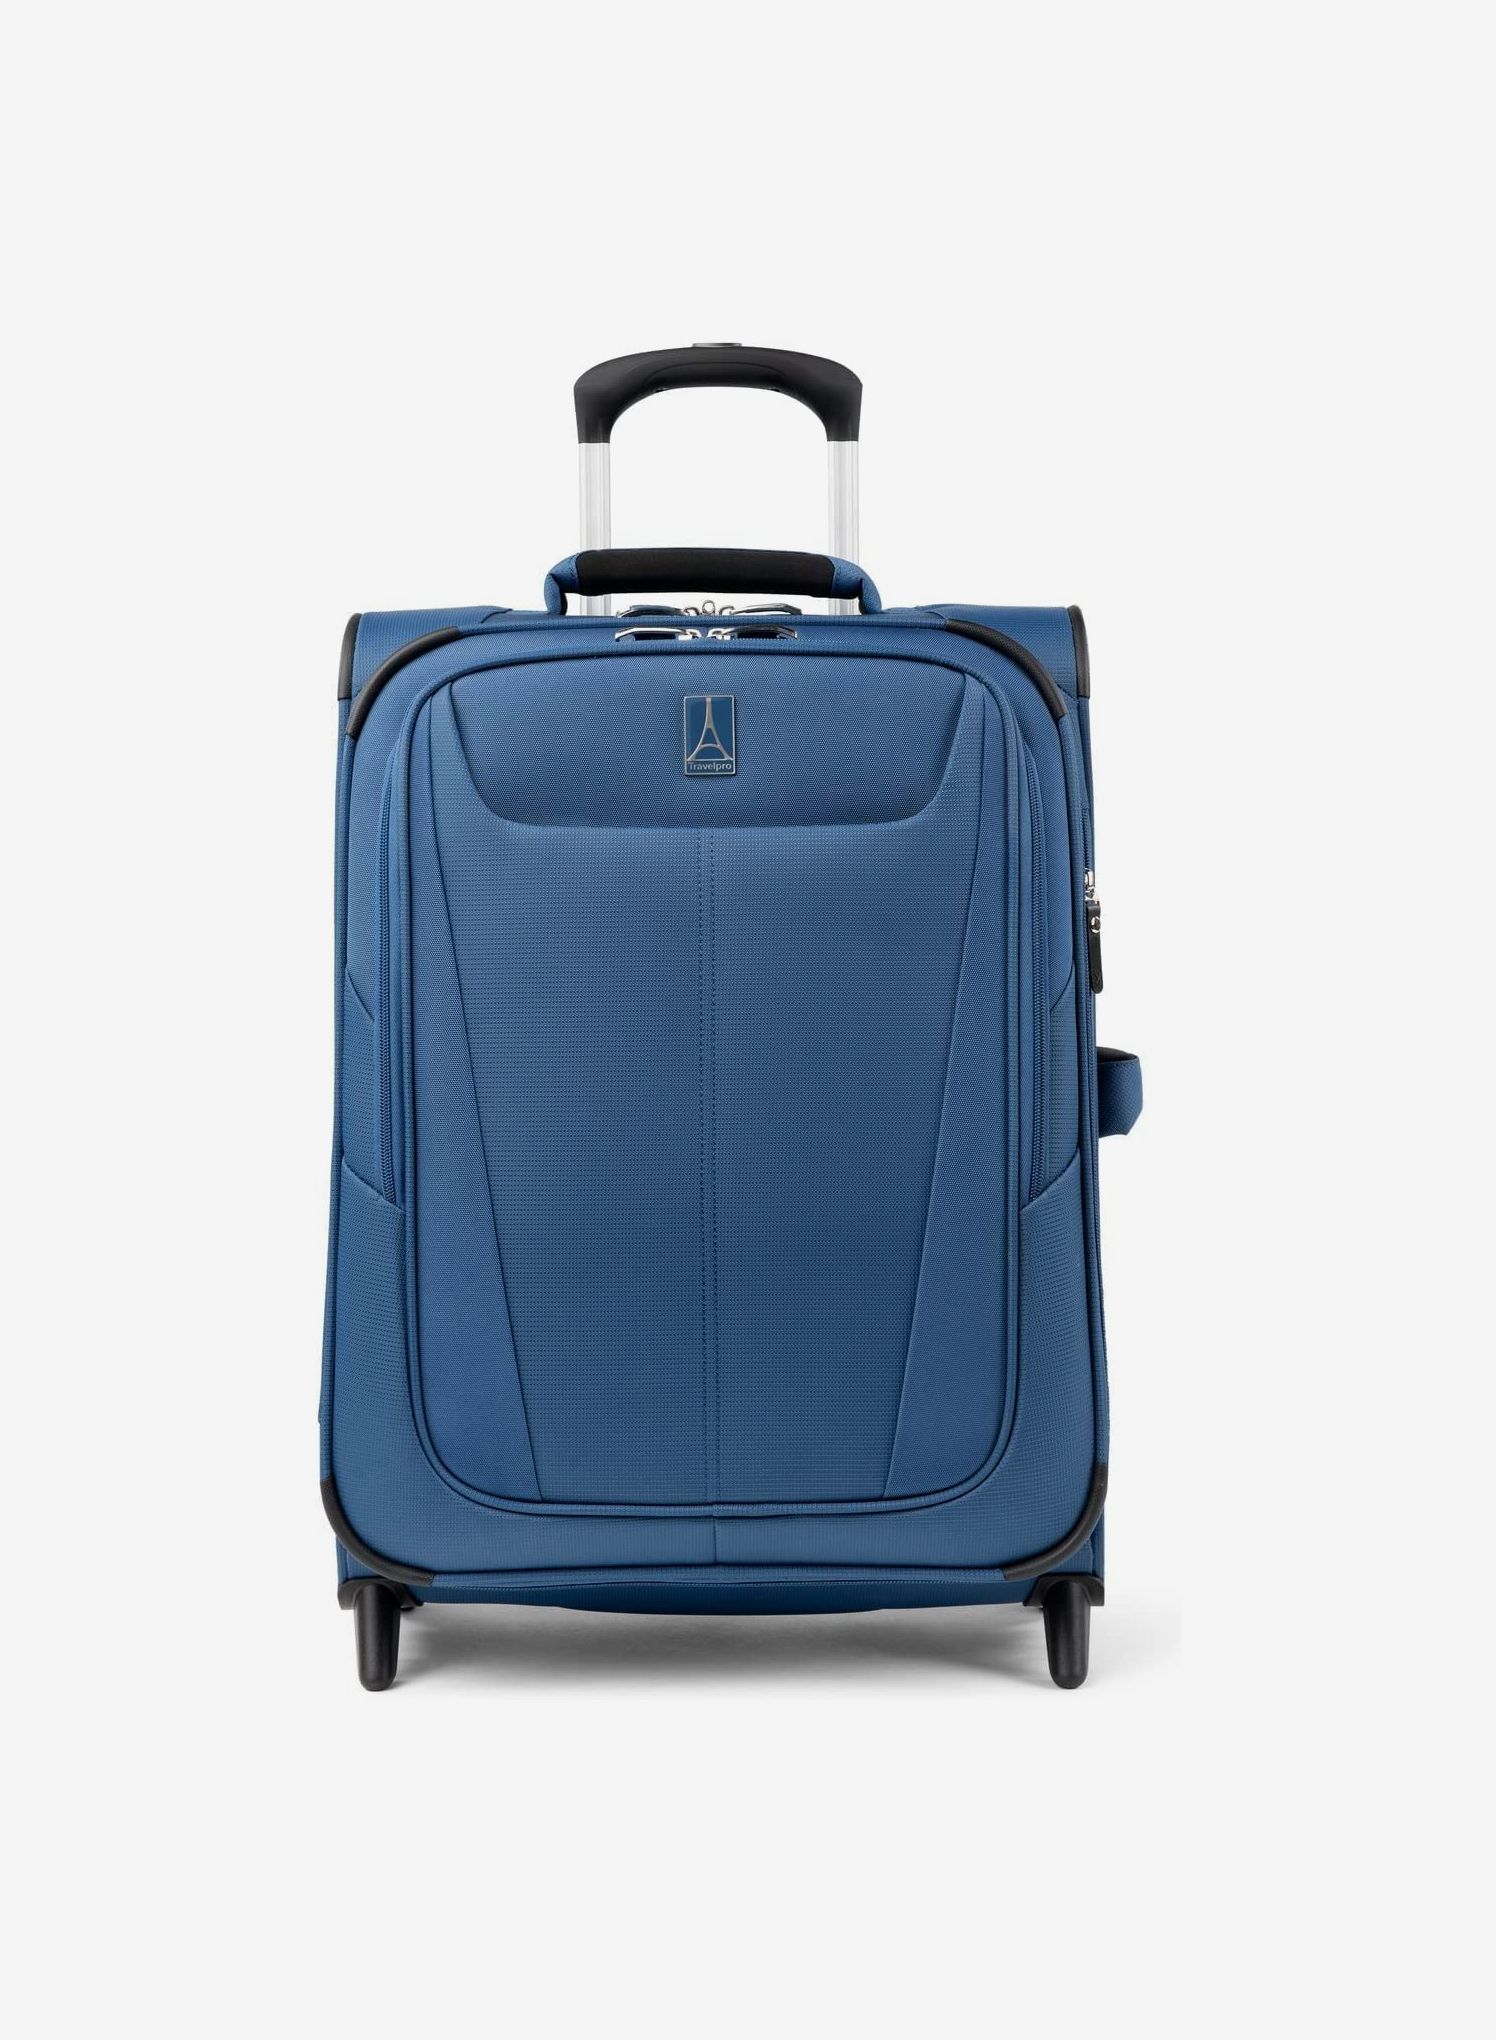 Luggage Review: Away Kids' Carry-On - The Points Guy